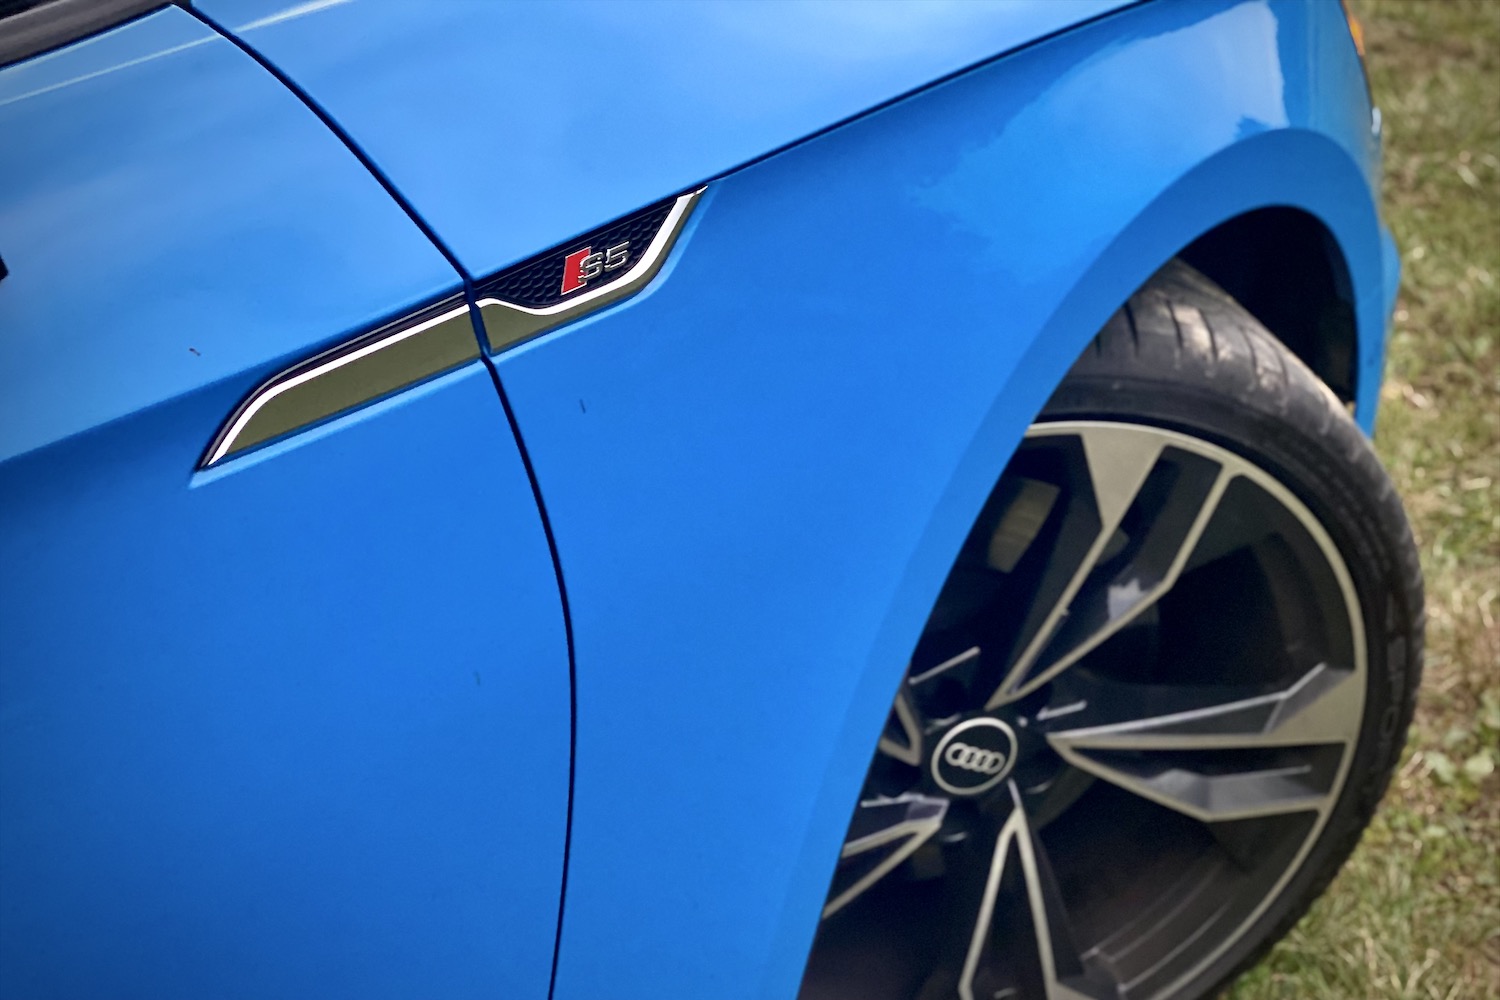 Close up of front fender and wheel in the 2023 Audi S5 Sportback in a grassy field.